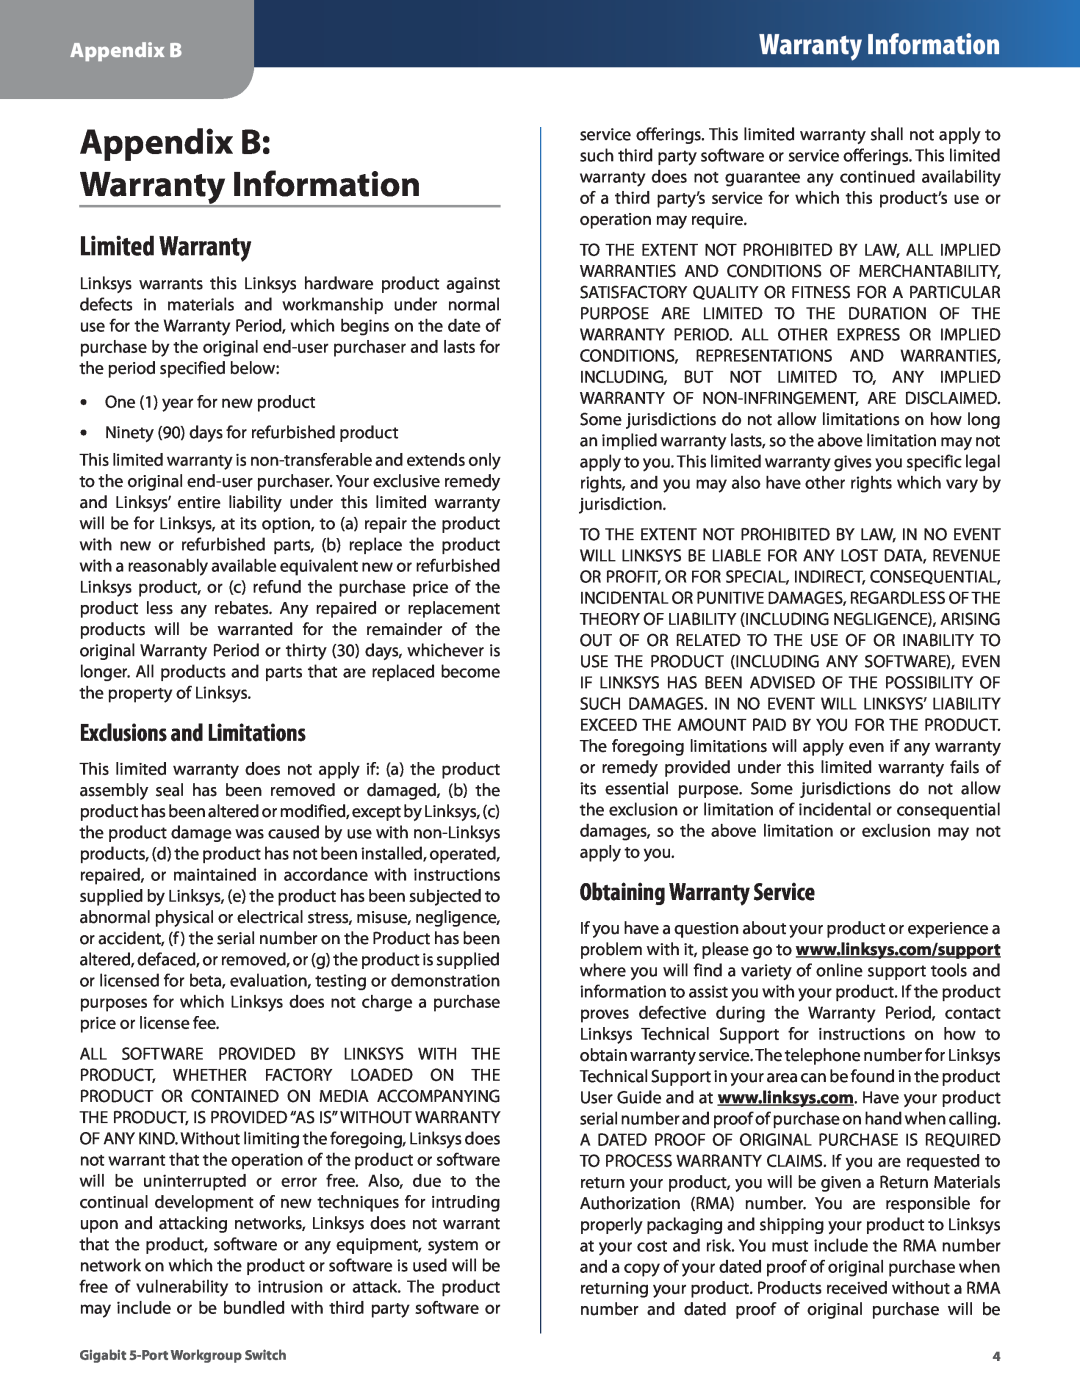 Cisco Systems EG005W manual Appendix B Warranty Information, Limited Warranty, Exclusions and Limitations 